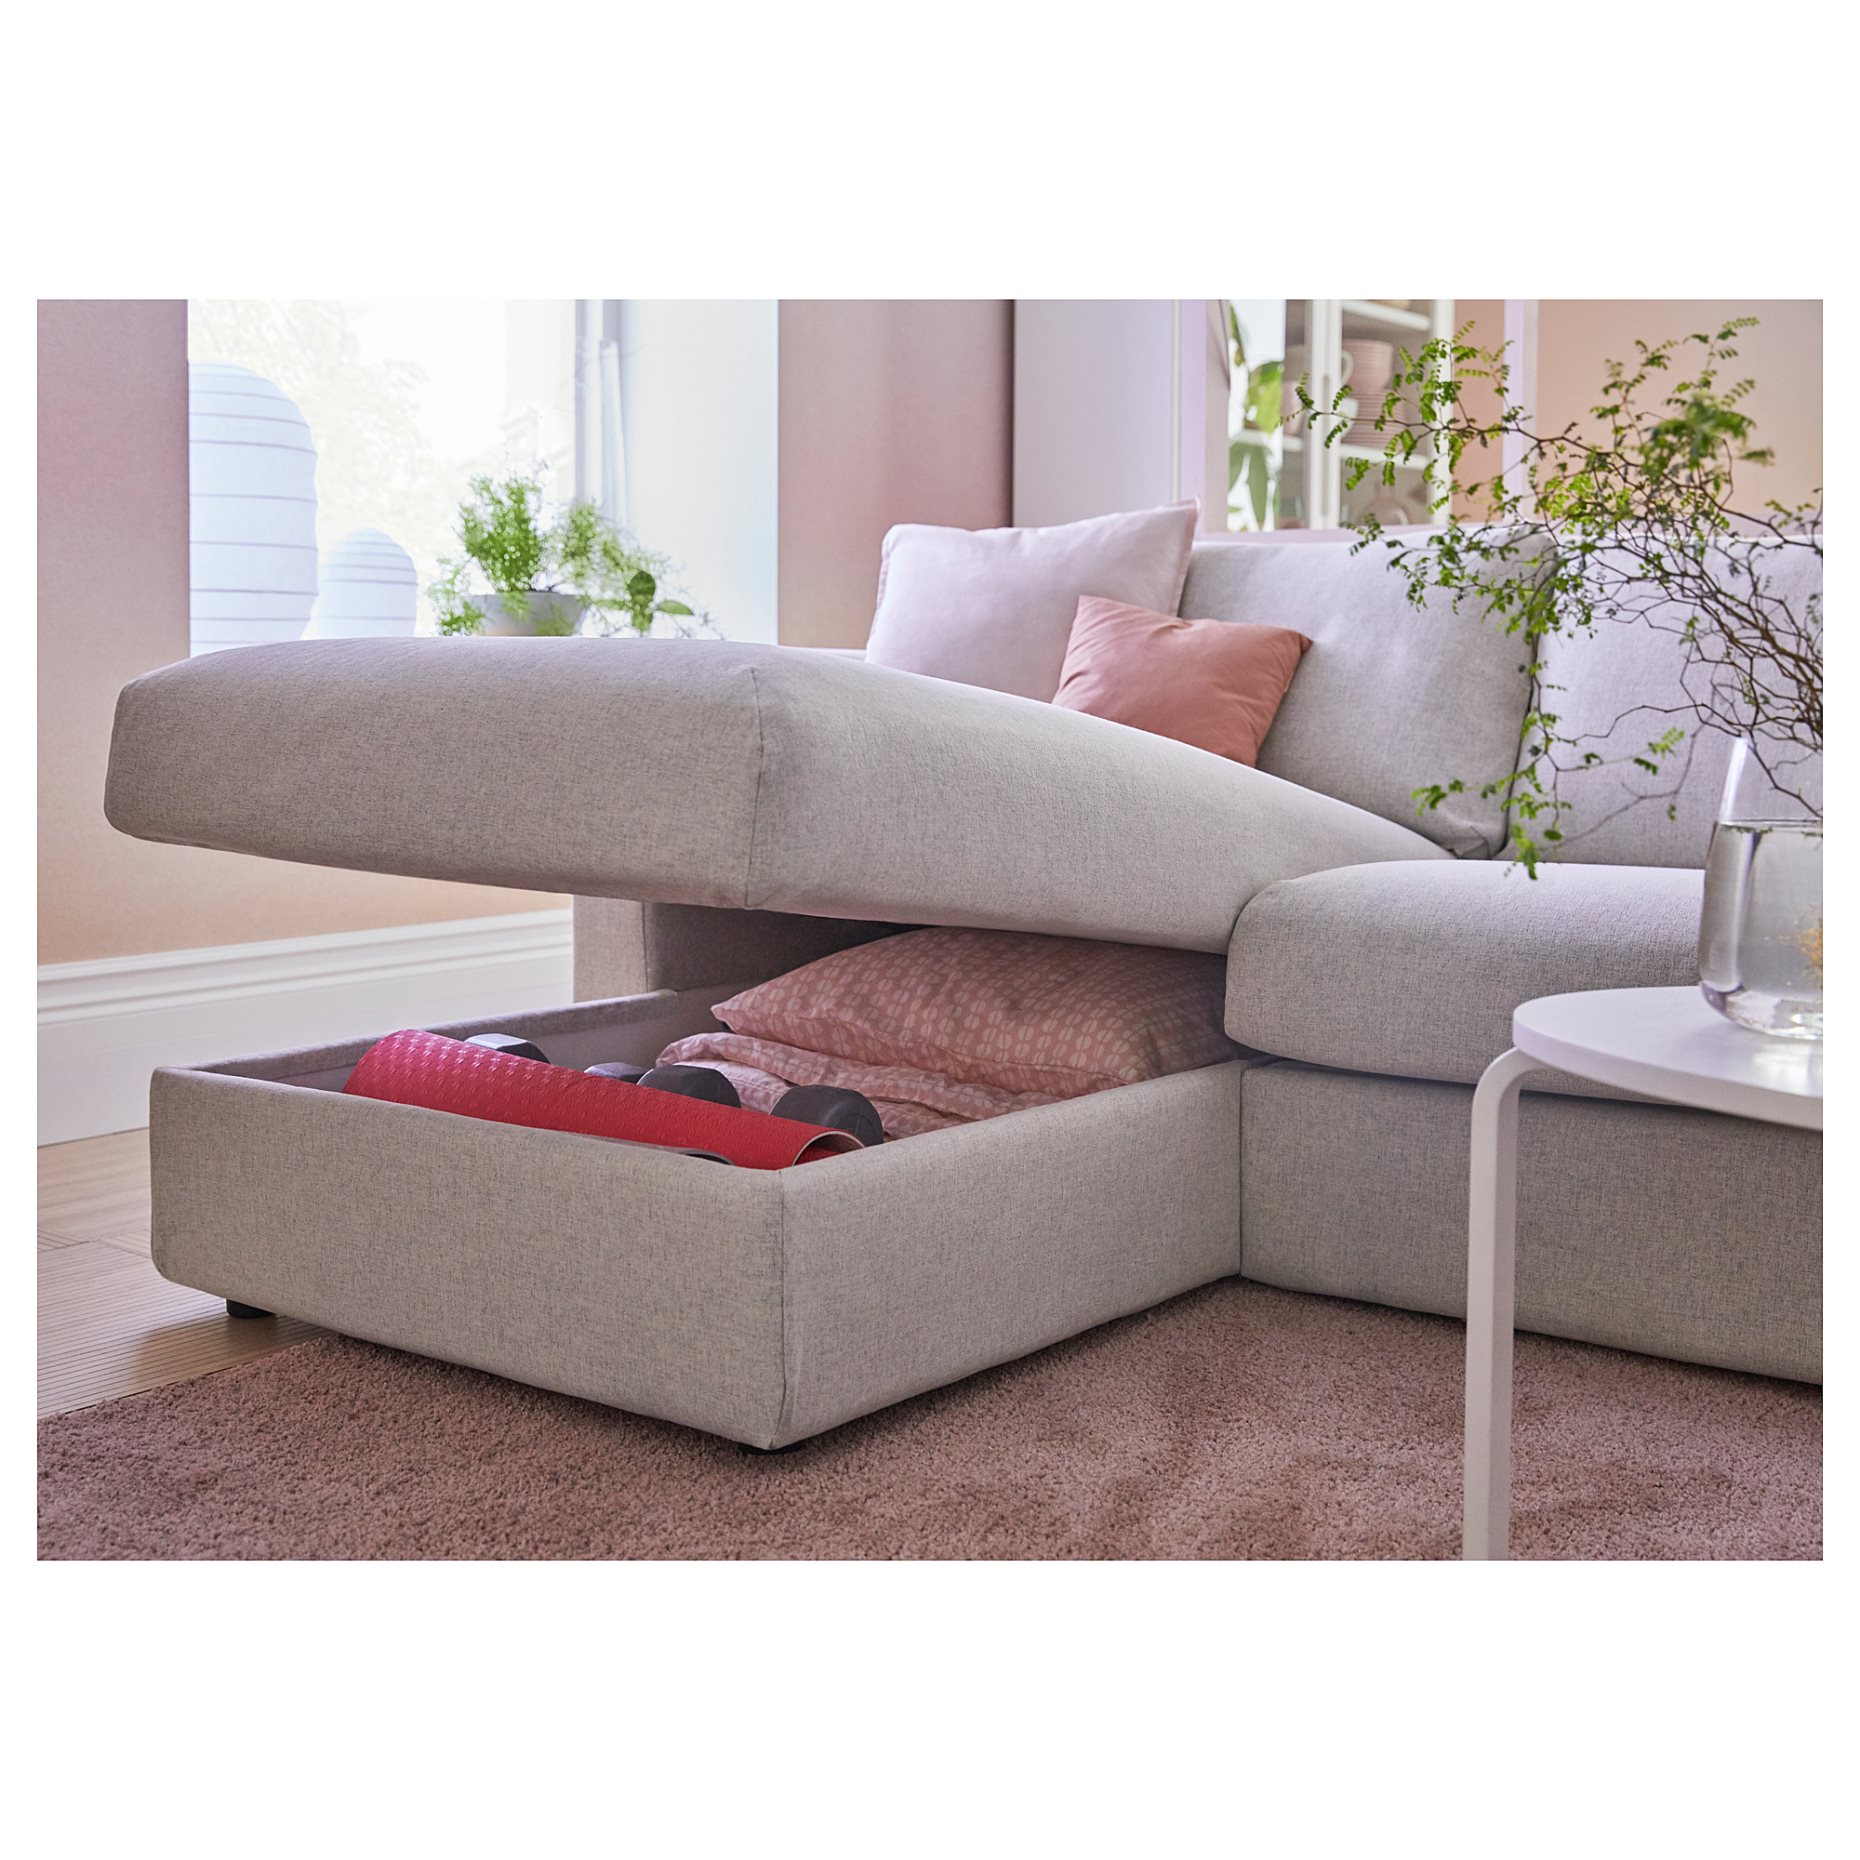 VIMLE, 4-seat sofa with chaise longue with wide armrests, 994.017.63